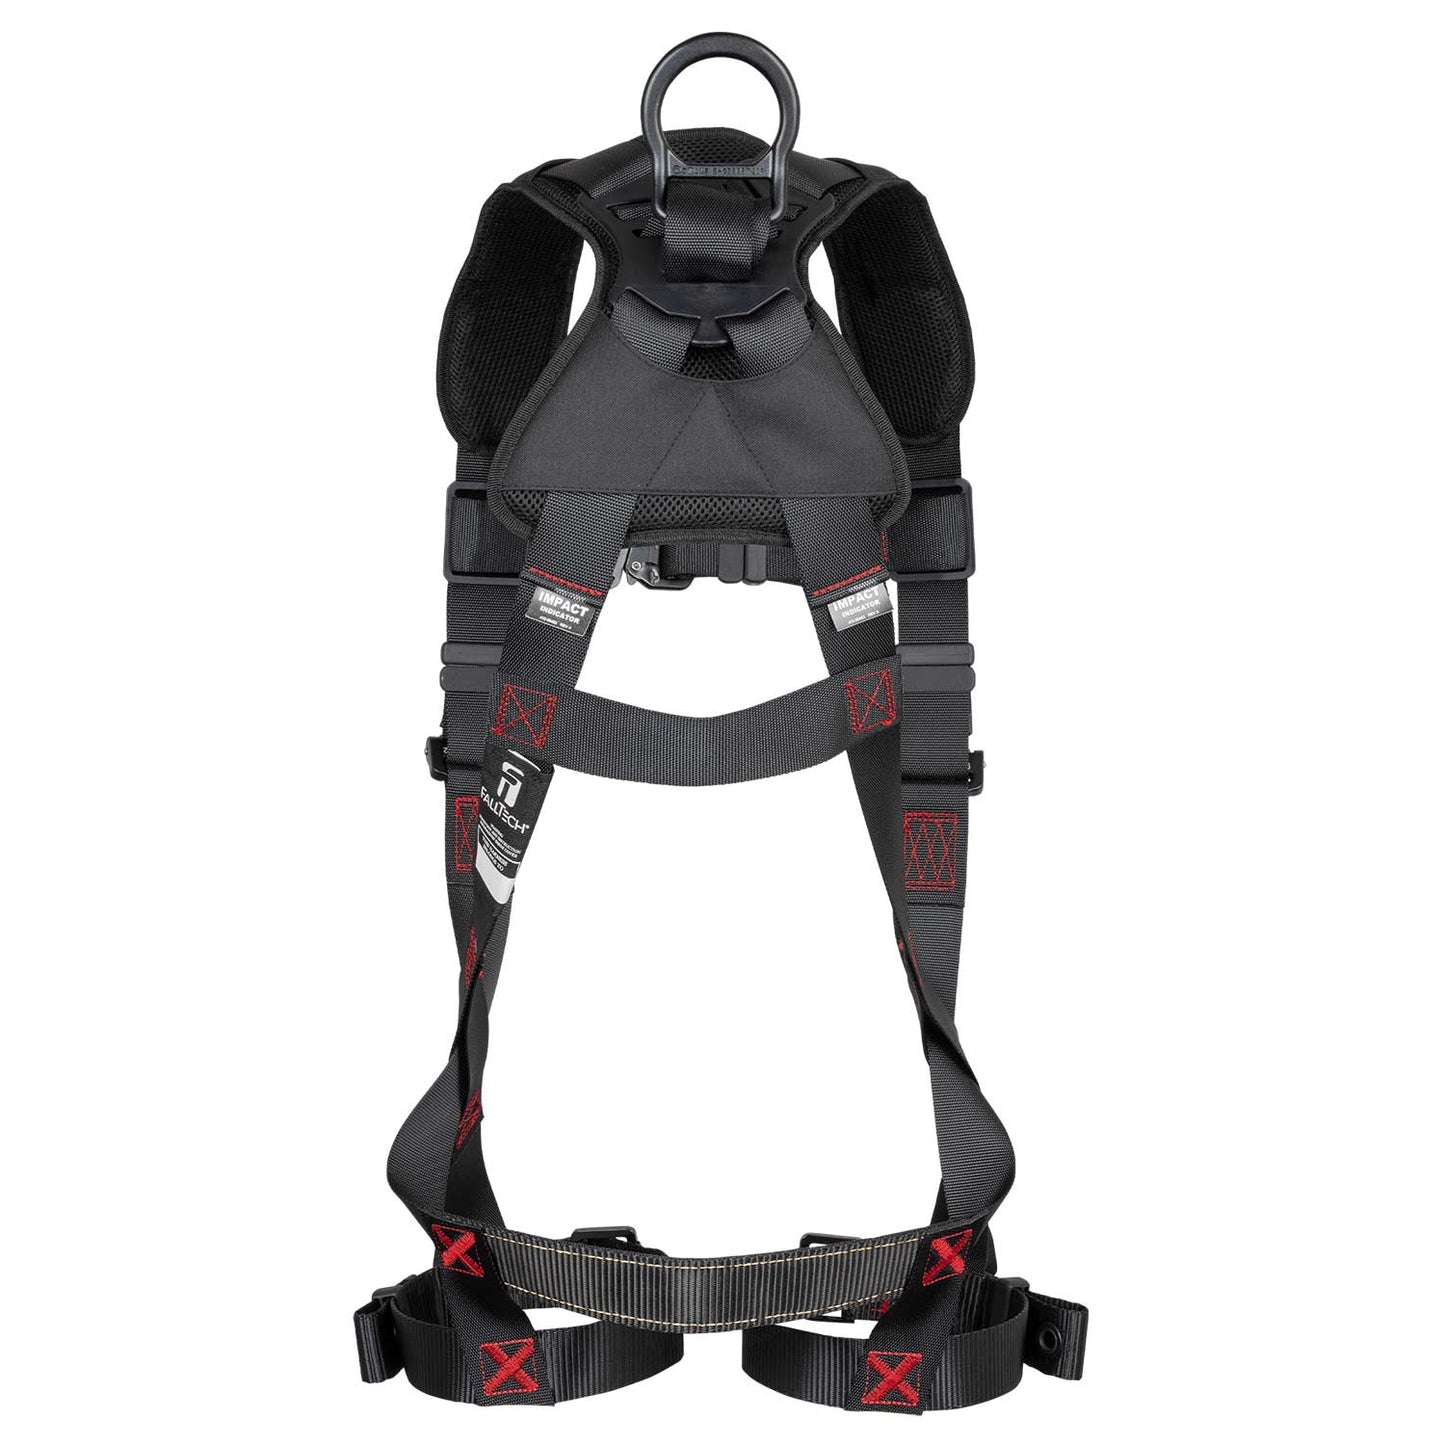 FallTech FT-Iron Full-Body Safety Harness w/ Trauma Straps | Non-Belted | S/M | 8143BSM